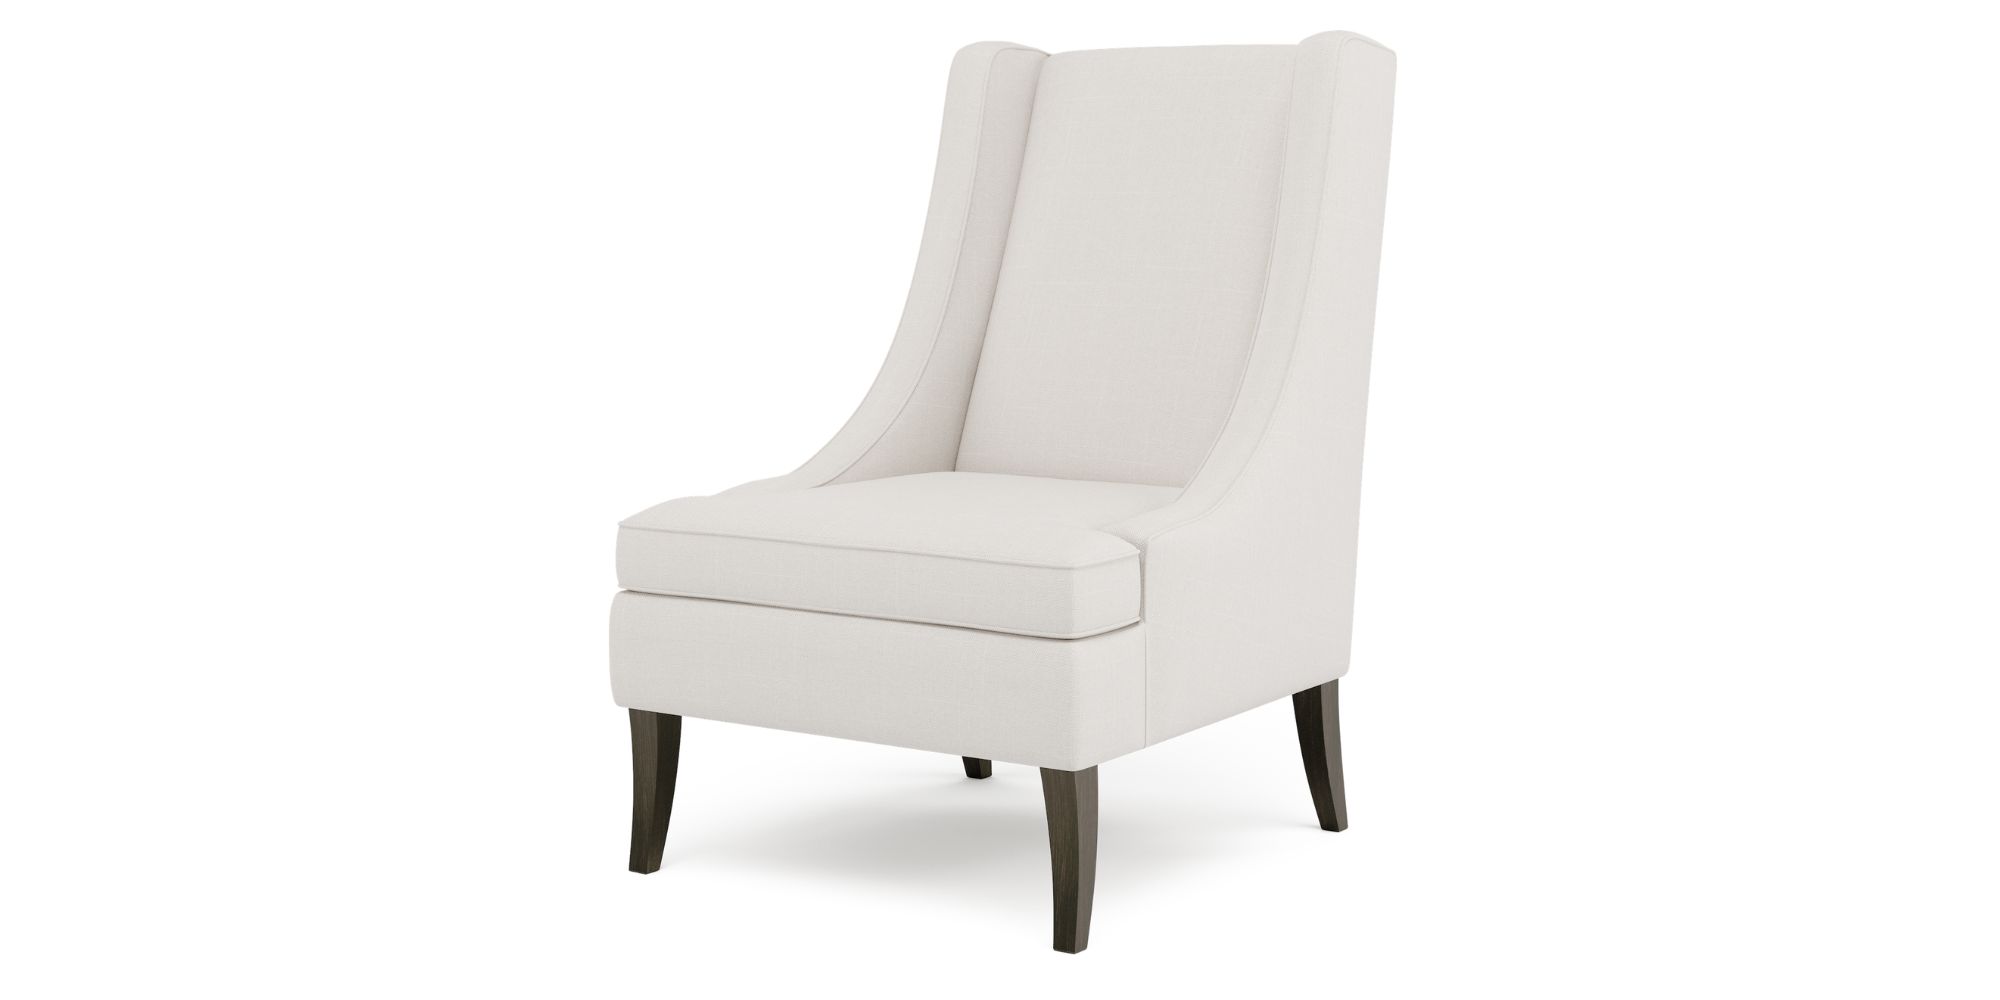 Coronet Armchair in Outdoor Chairs for Coronet collection